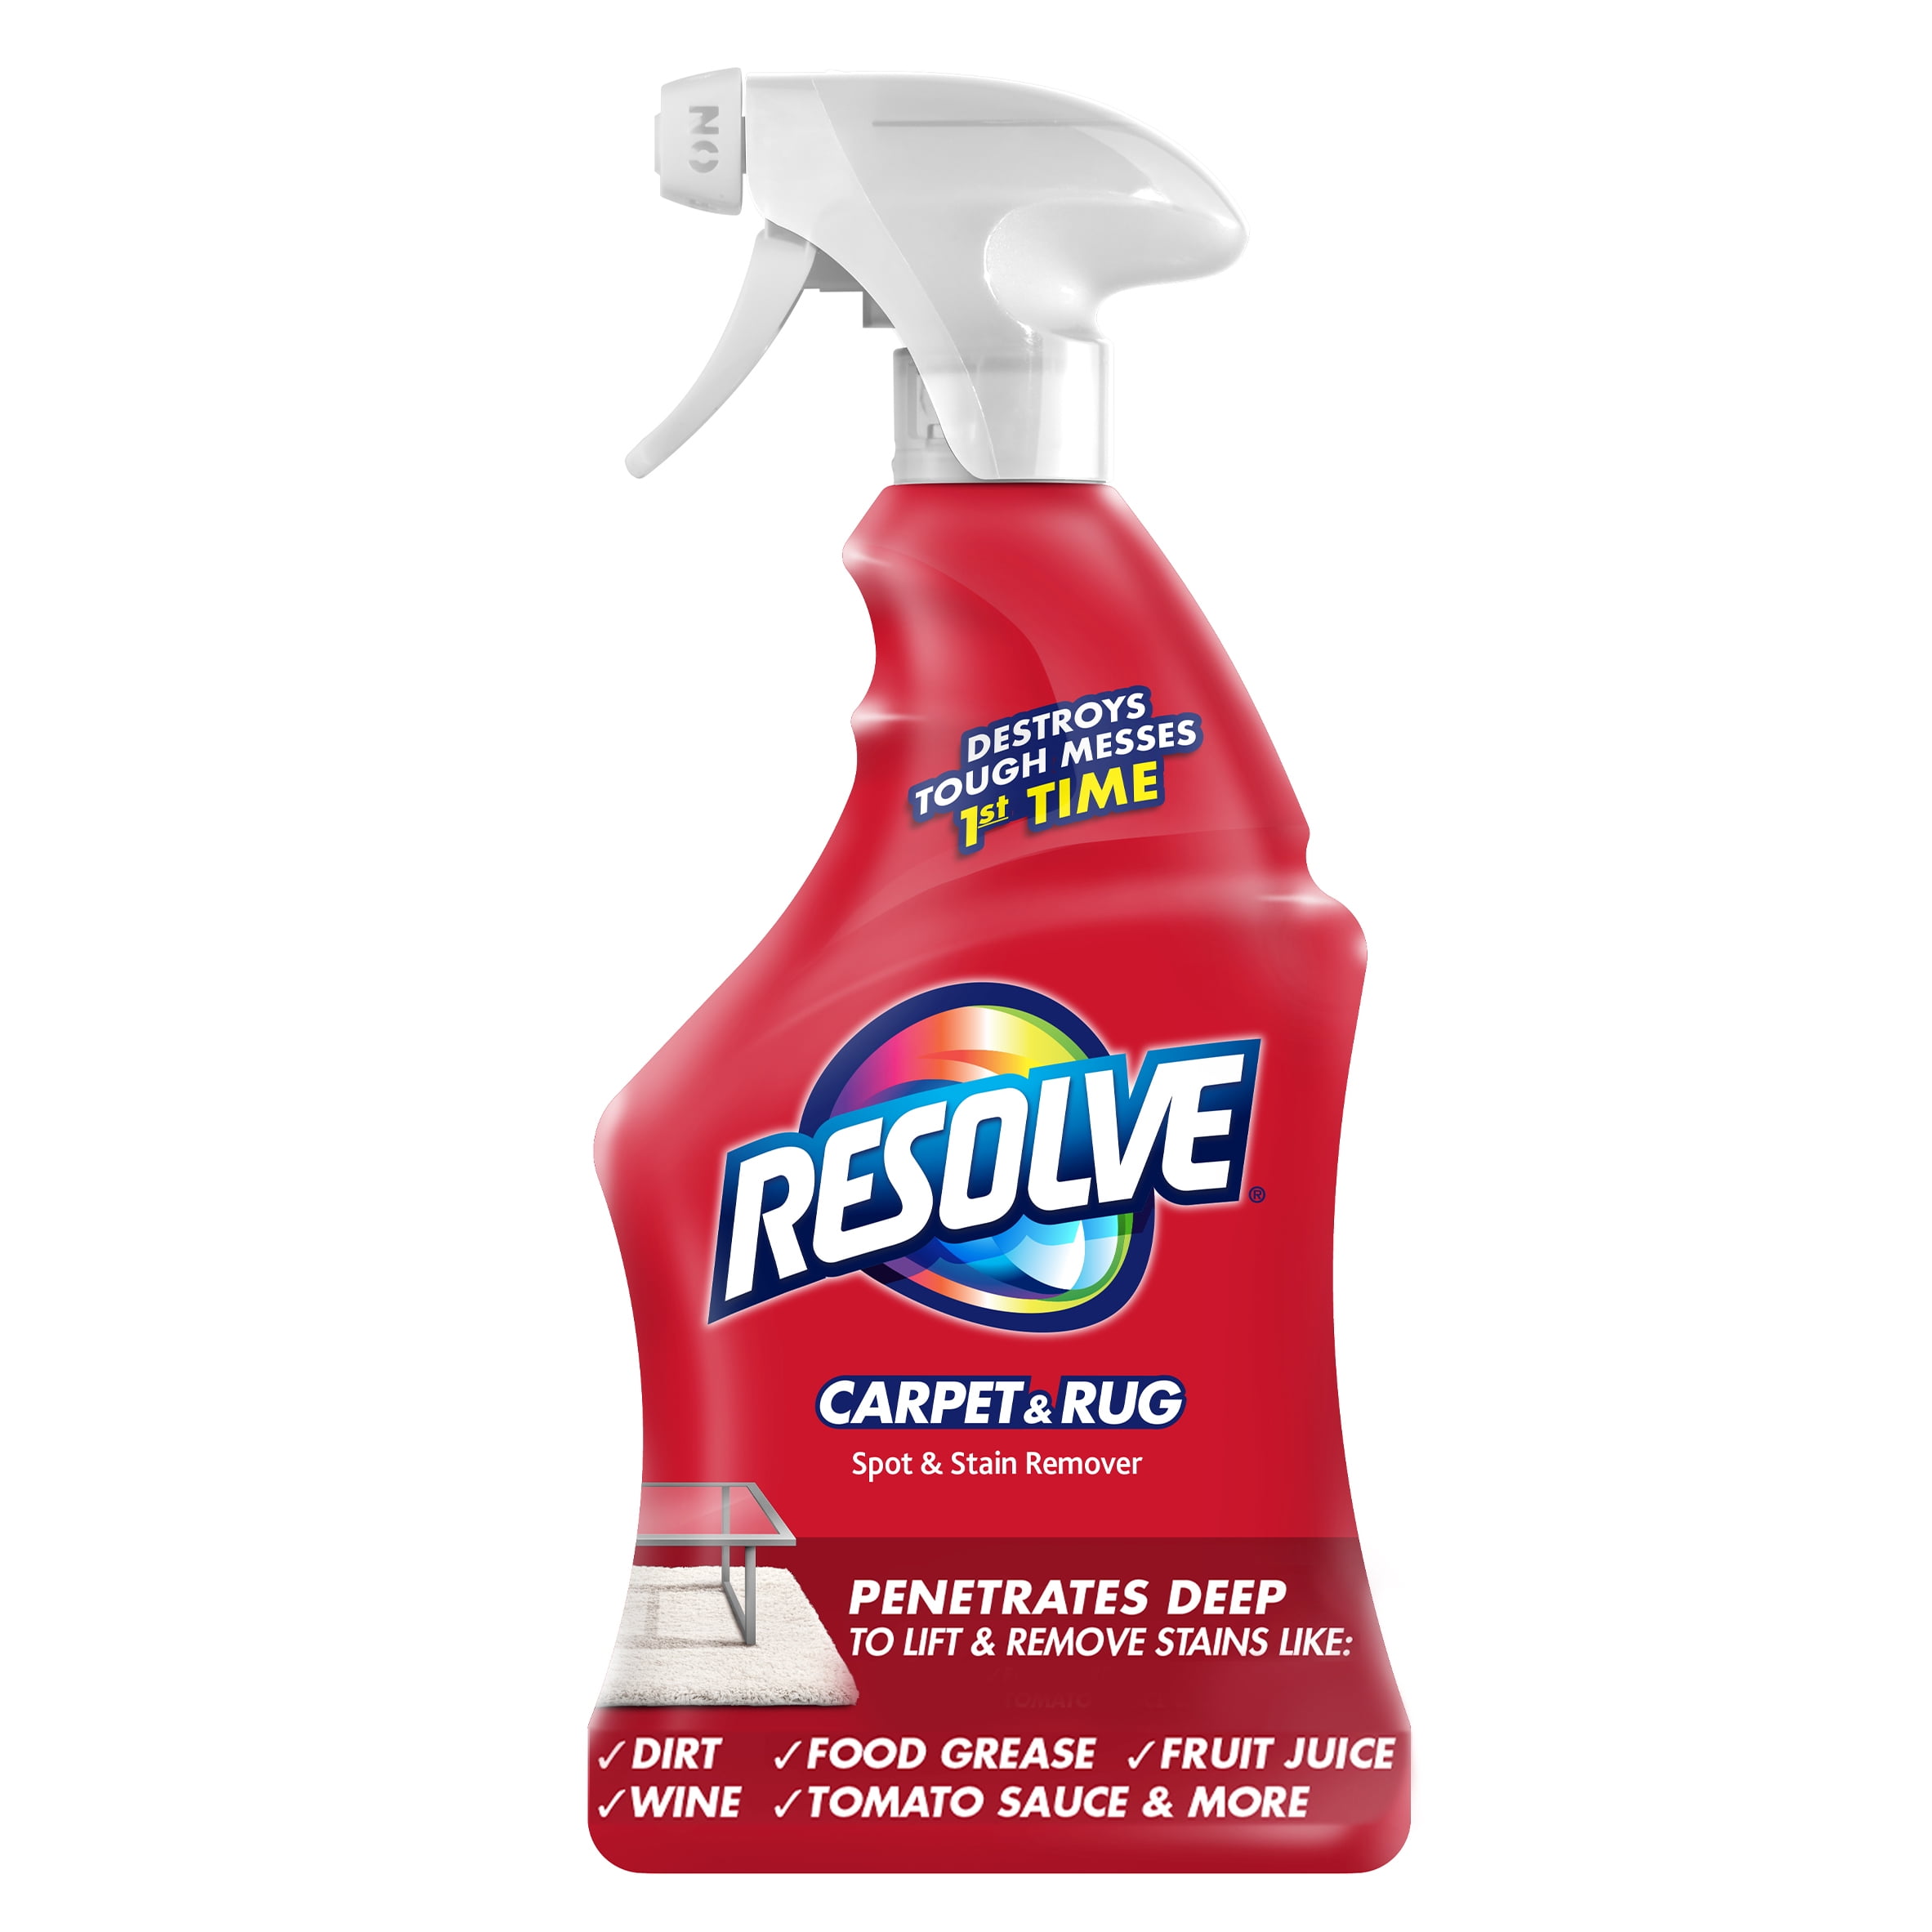 Resolve Carpet Cleaner Spray Spot, Can You Use Resolve Carpet Cleaner On Car Seats